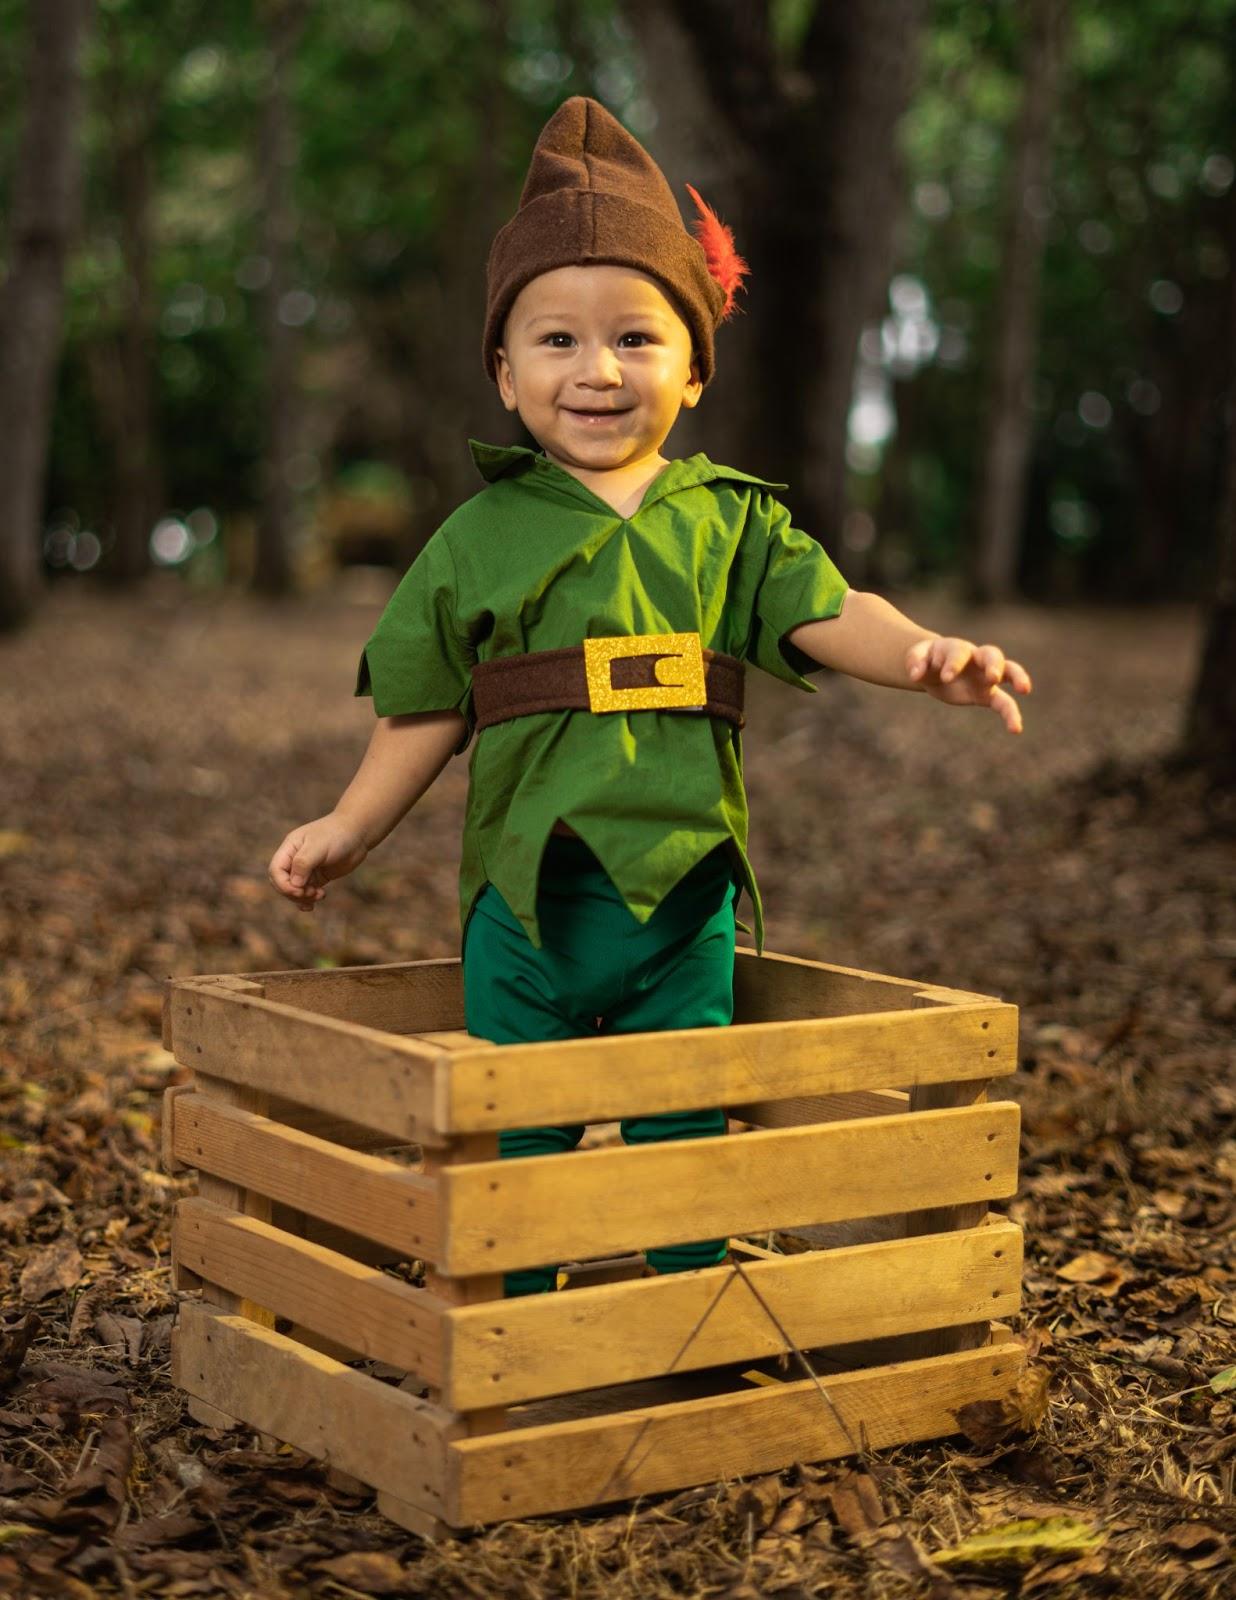 Cute little boy dressed in Peter Pan clothes - Disney Baby Names Ideas - Baby Journey